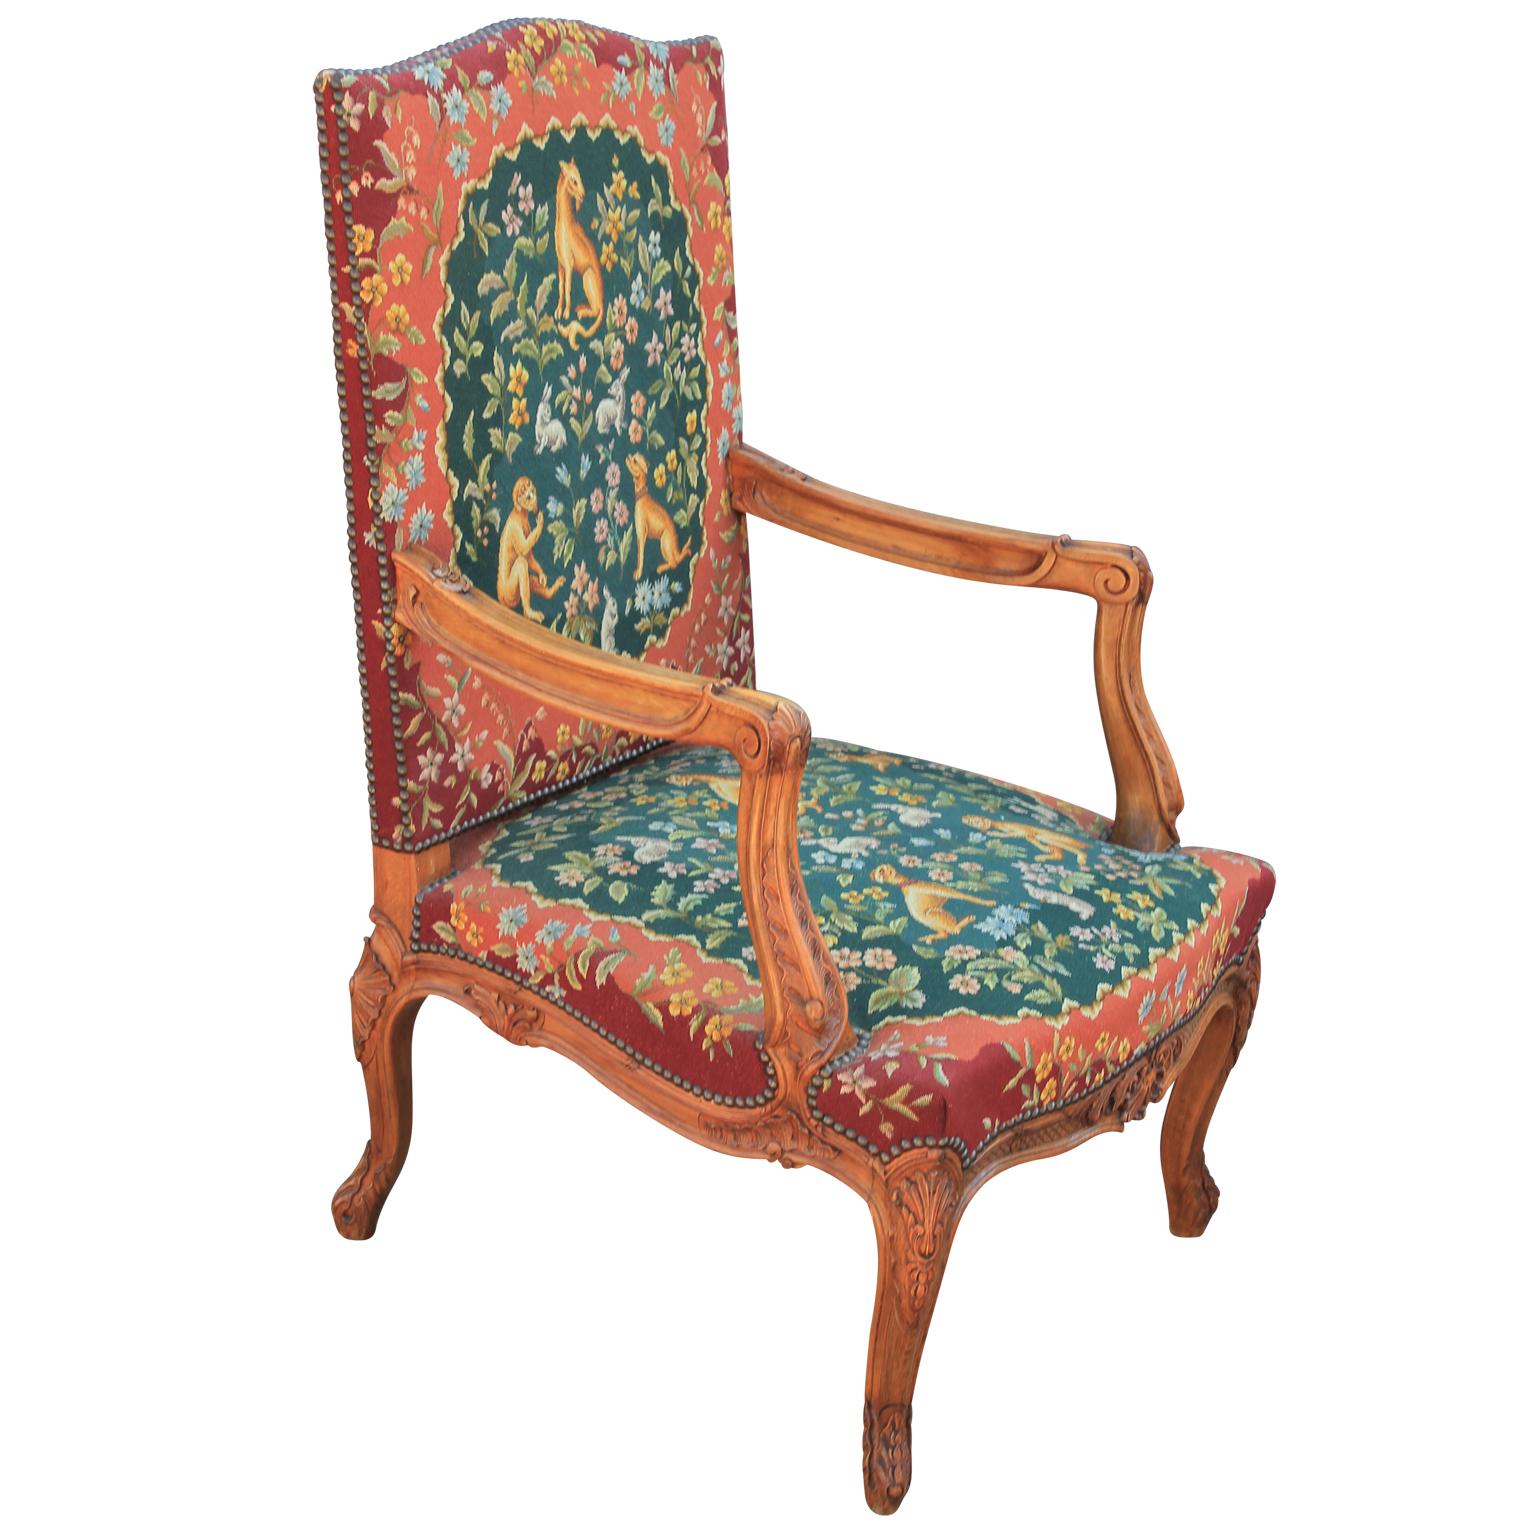 Exquisite pair of Louis XIV needlepoint upholstered walnut armchairs, shaped crest with open scroll arms, over cabriole legs ending in beautifully carved feet. Upholstered with an 18th century style intricate needlework depicting a variety of exotic